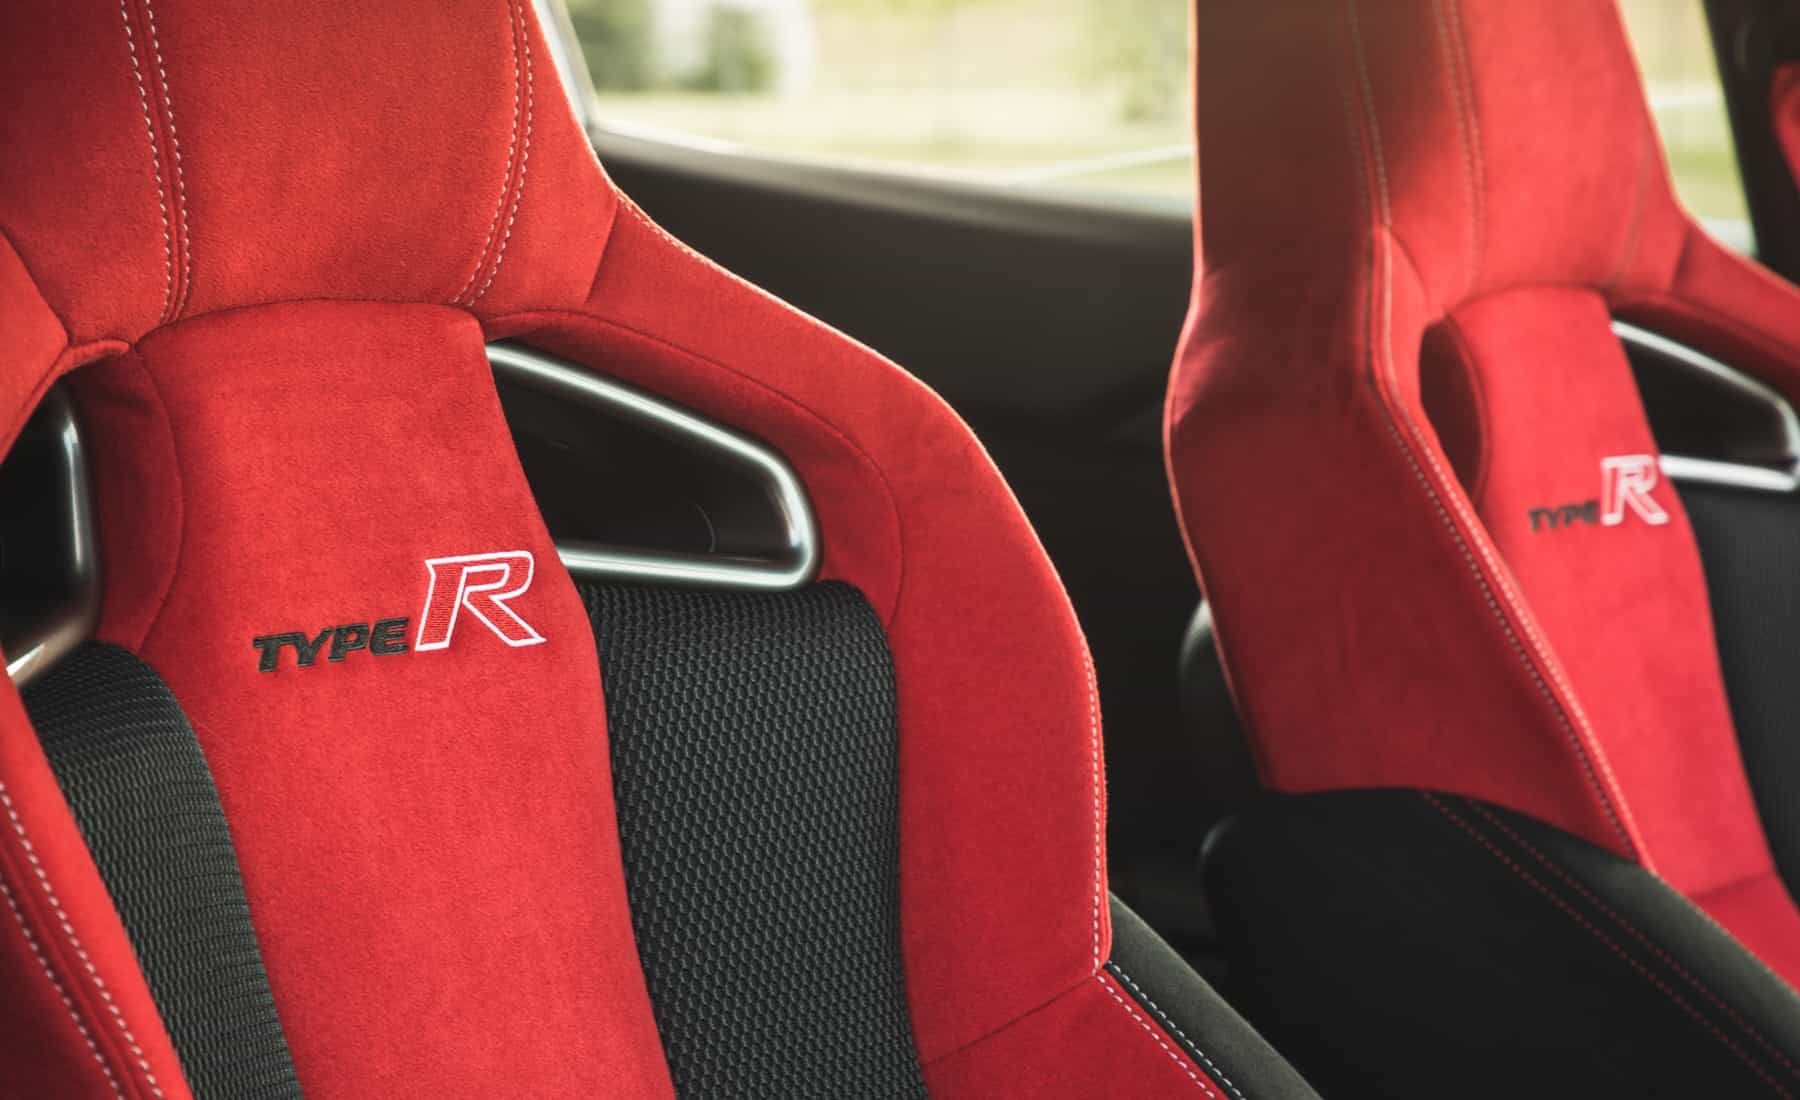 2017 Honda Civic Type R Interior Seats Front Details (View 20 of 48)